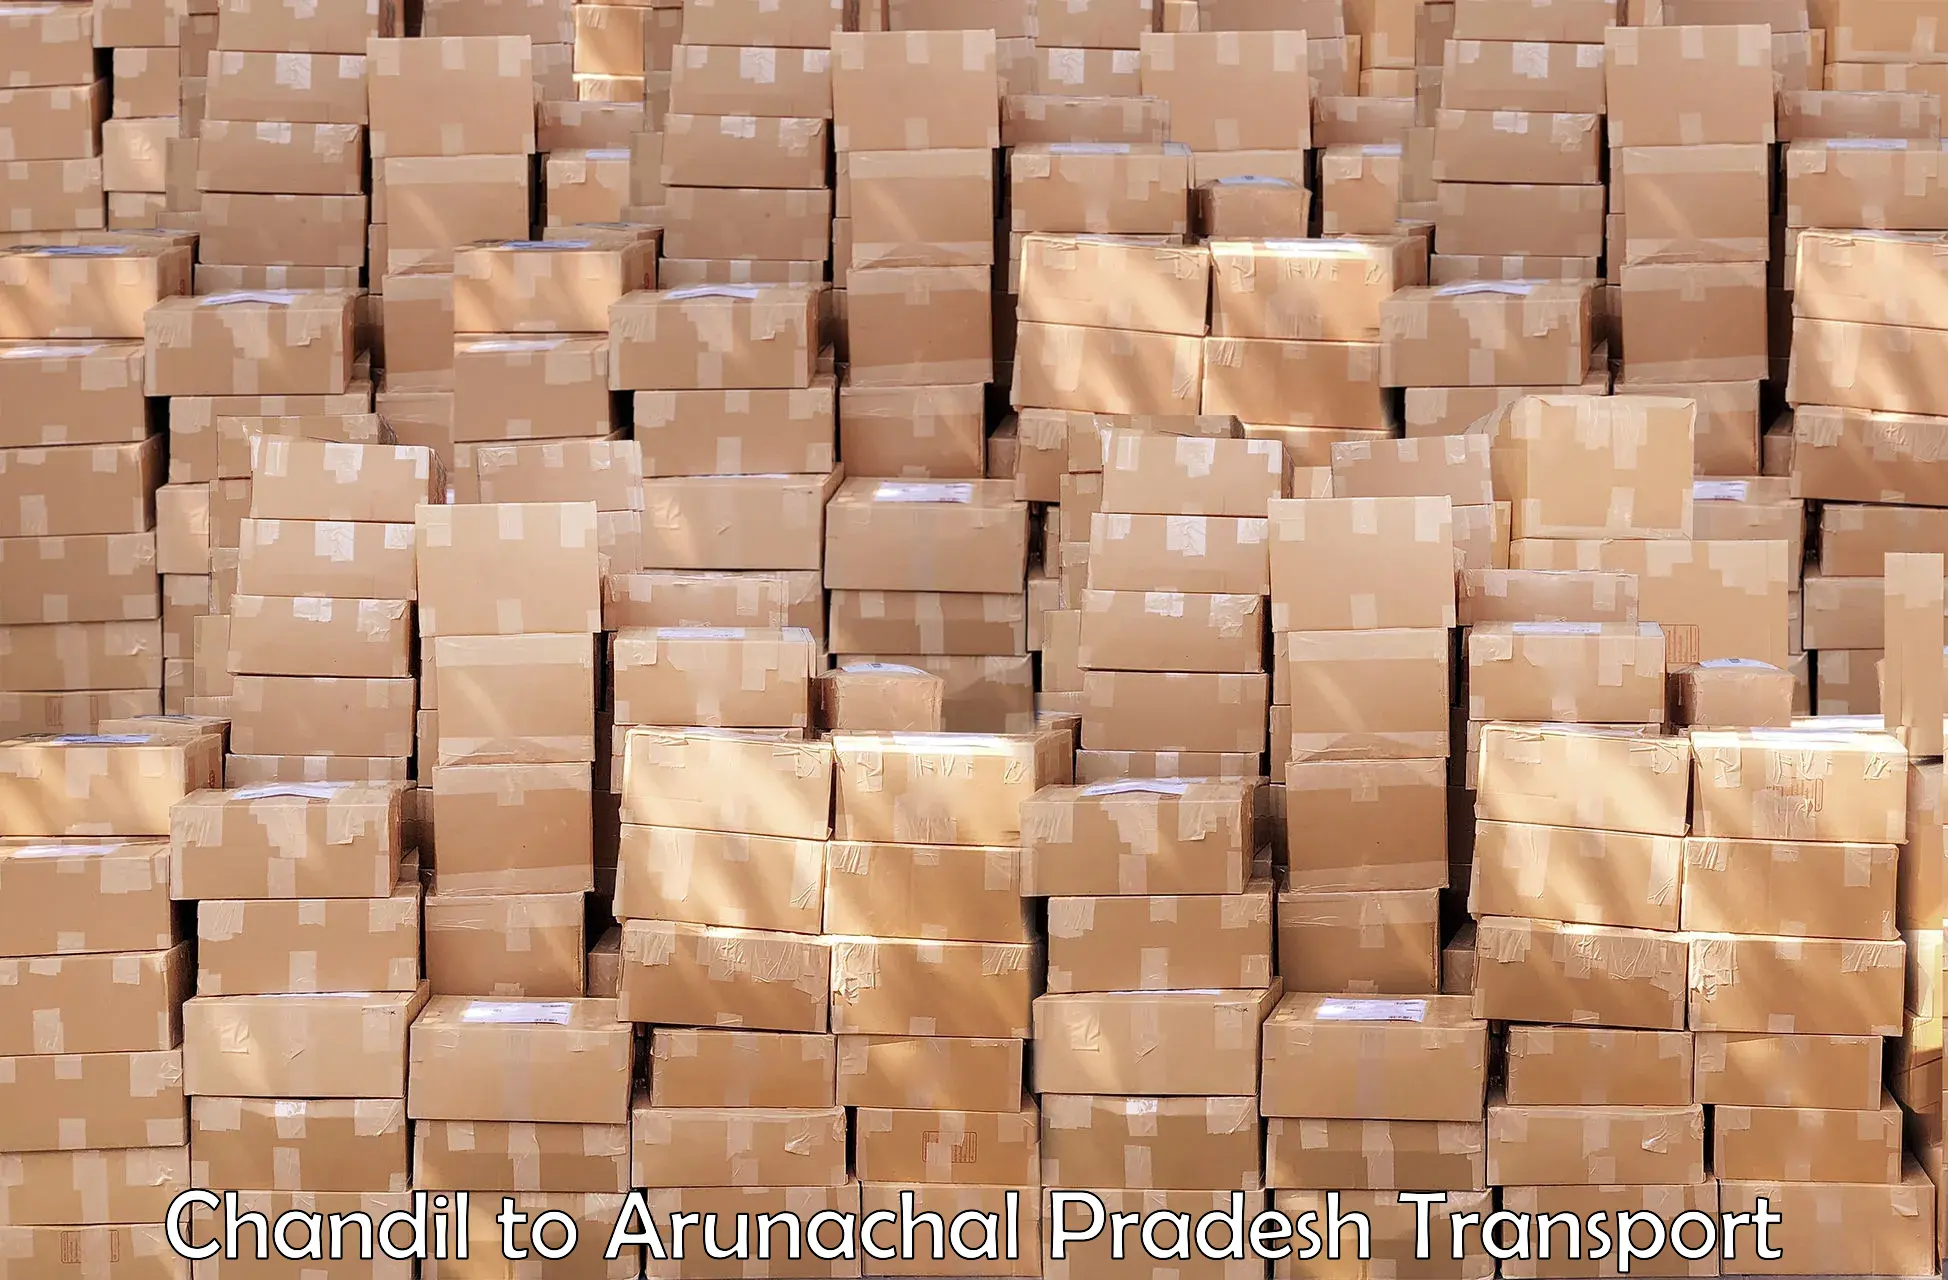 Cargo train transport services Chandil to Deomali